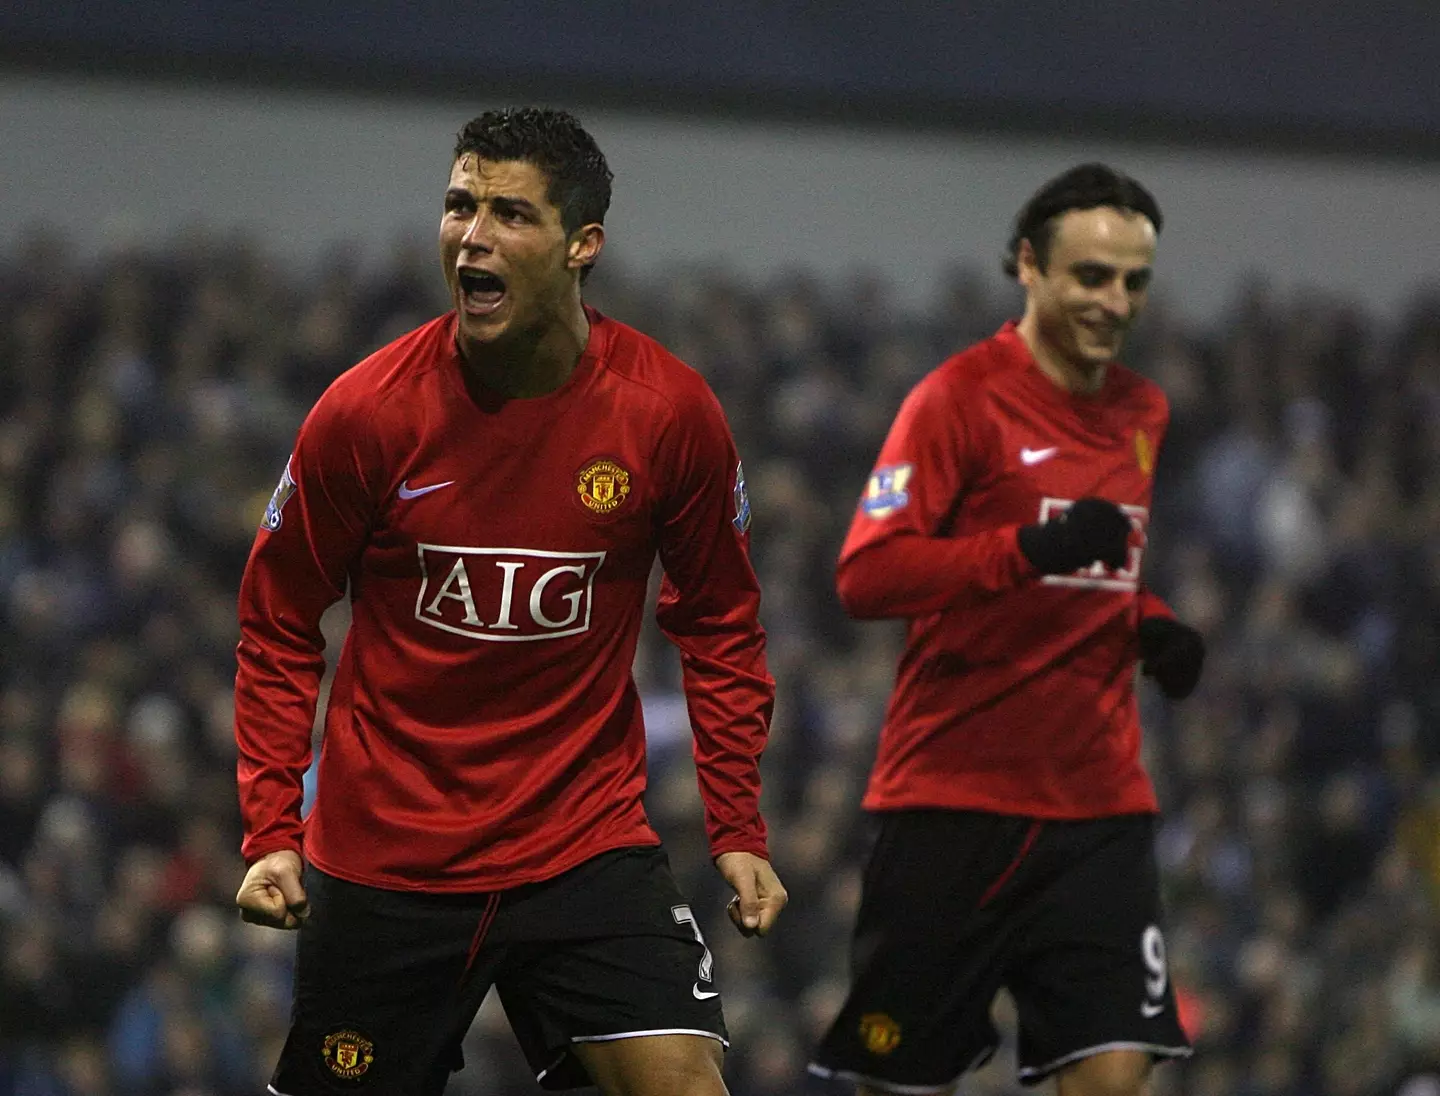 Berbatov and Ronaldo celebrate another goal during their time at United.